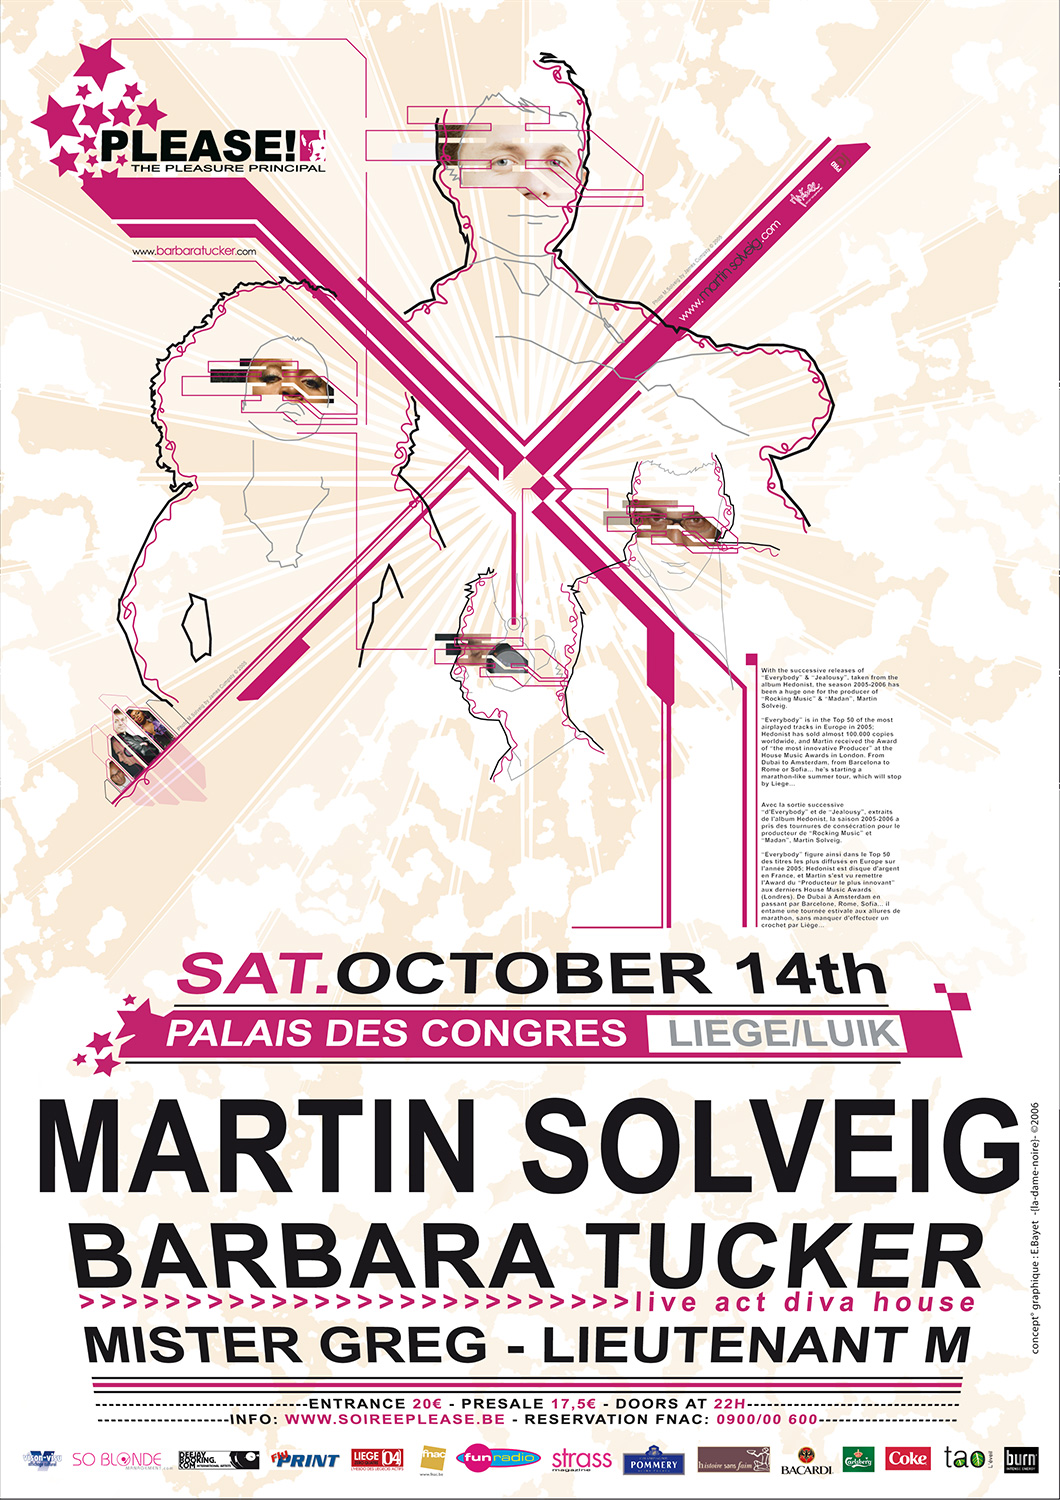 Poster for an event with Martin Solveig and Barbara Tucker